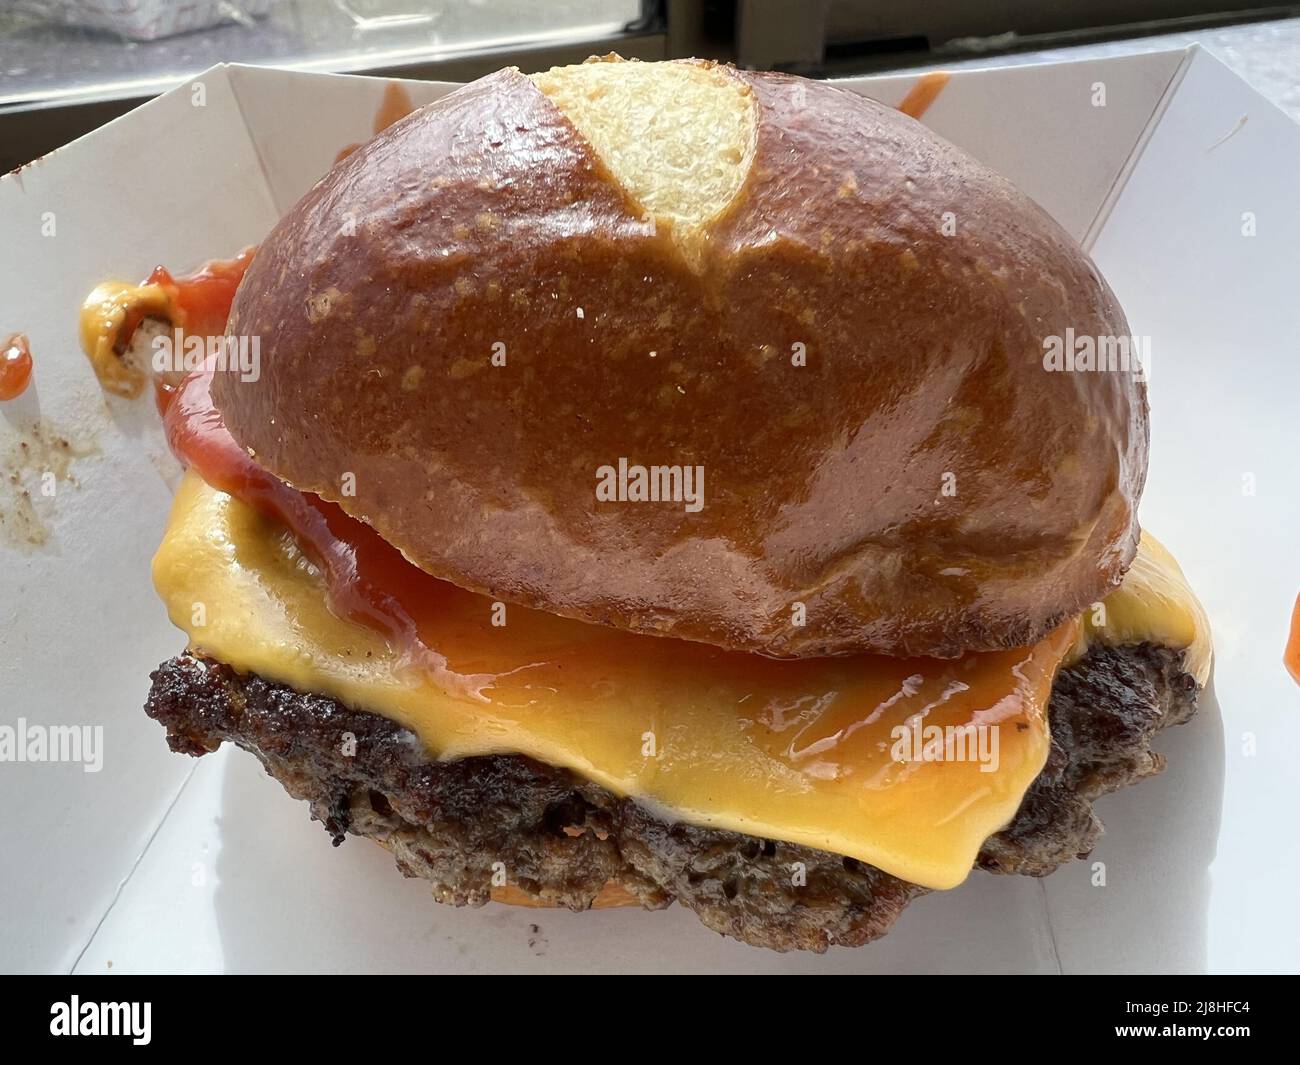 Smashed, blended burger with mushroom protein blended into meat, on a pretzel bun, San Francisco, California, March 17, 2022. Photo courtesy Sftm. Stock Photo